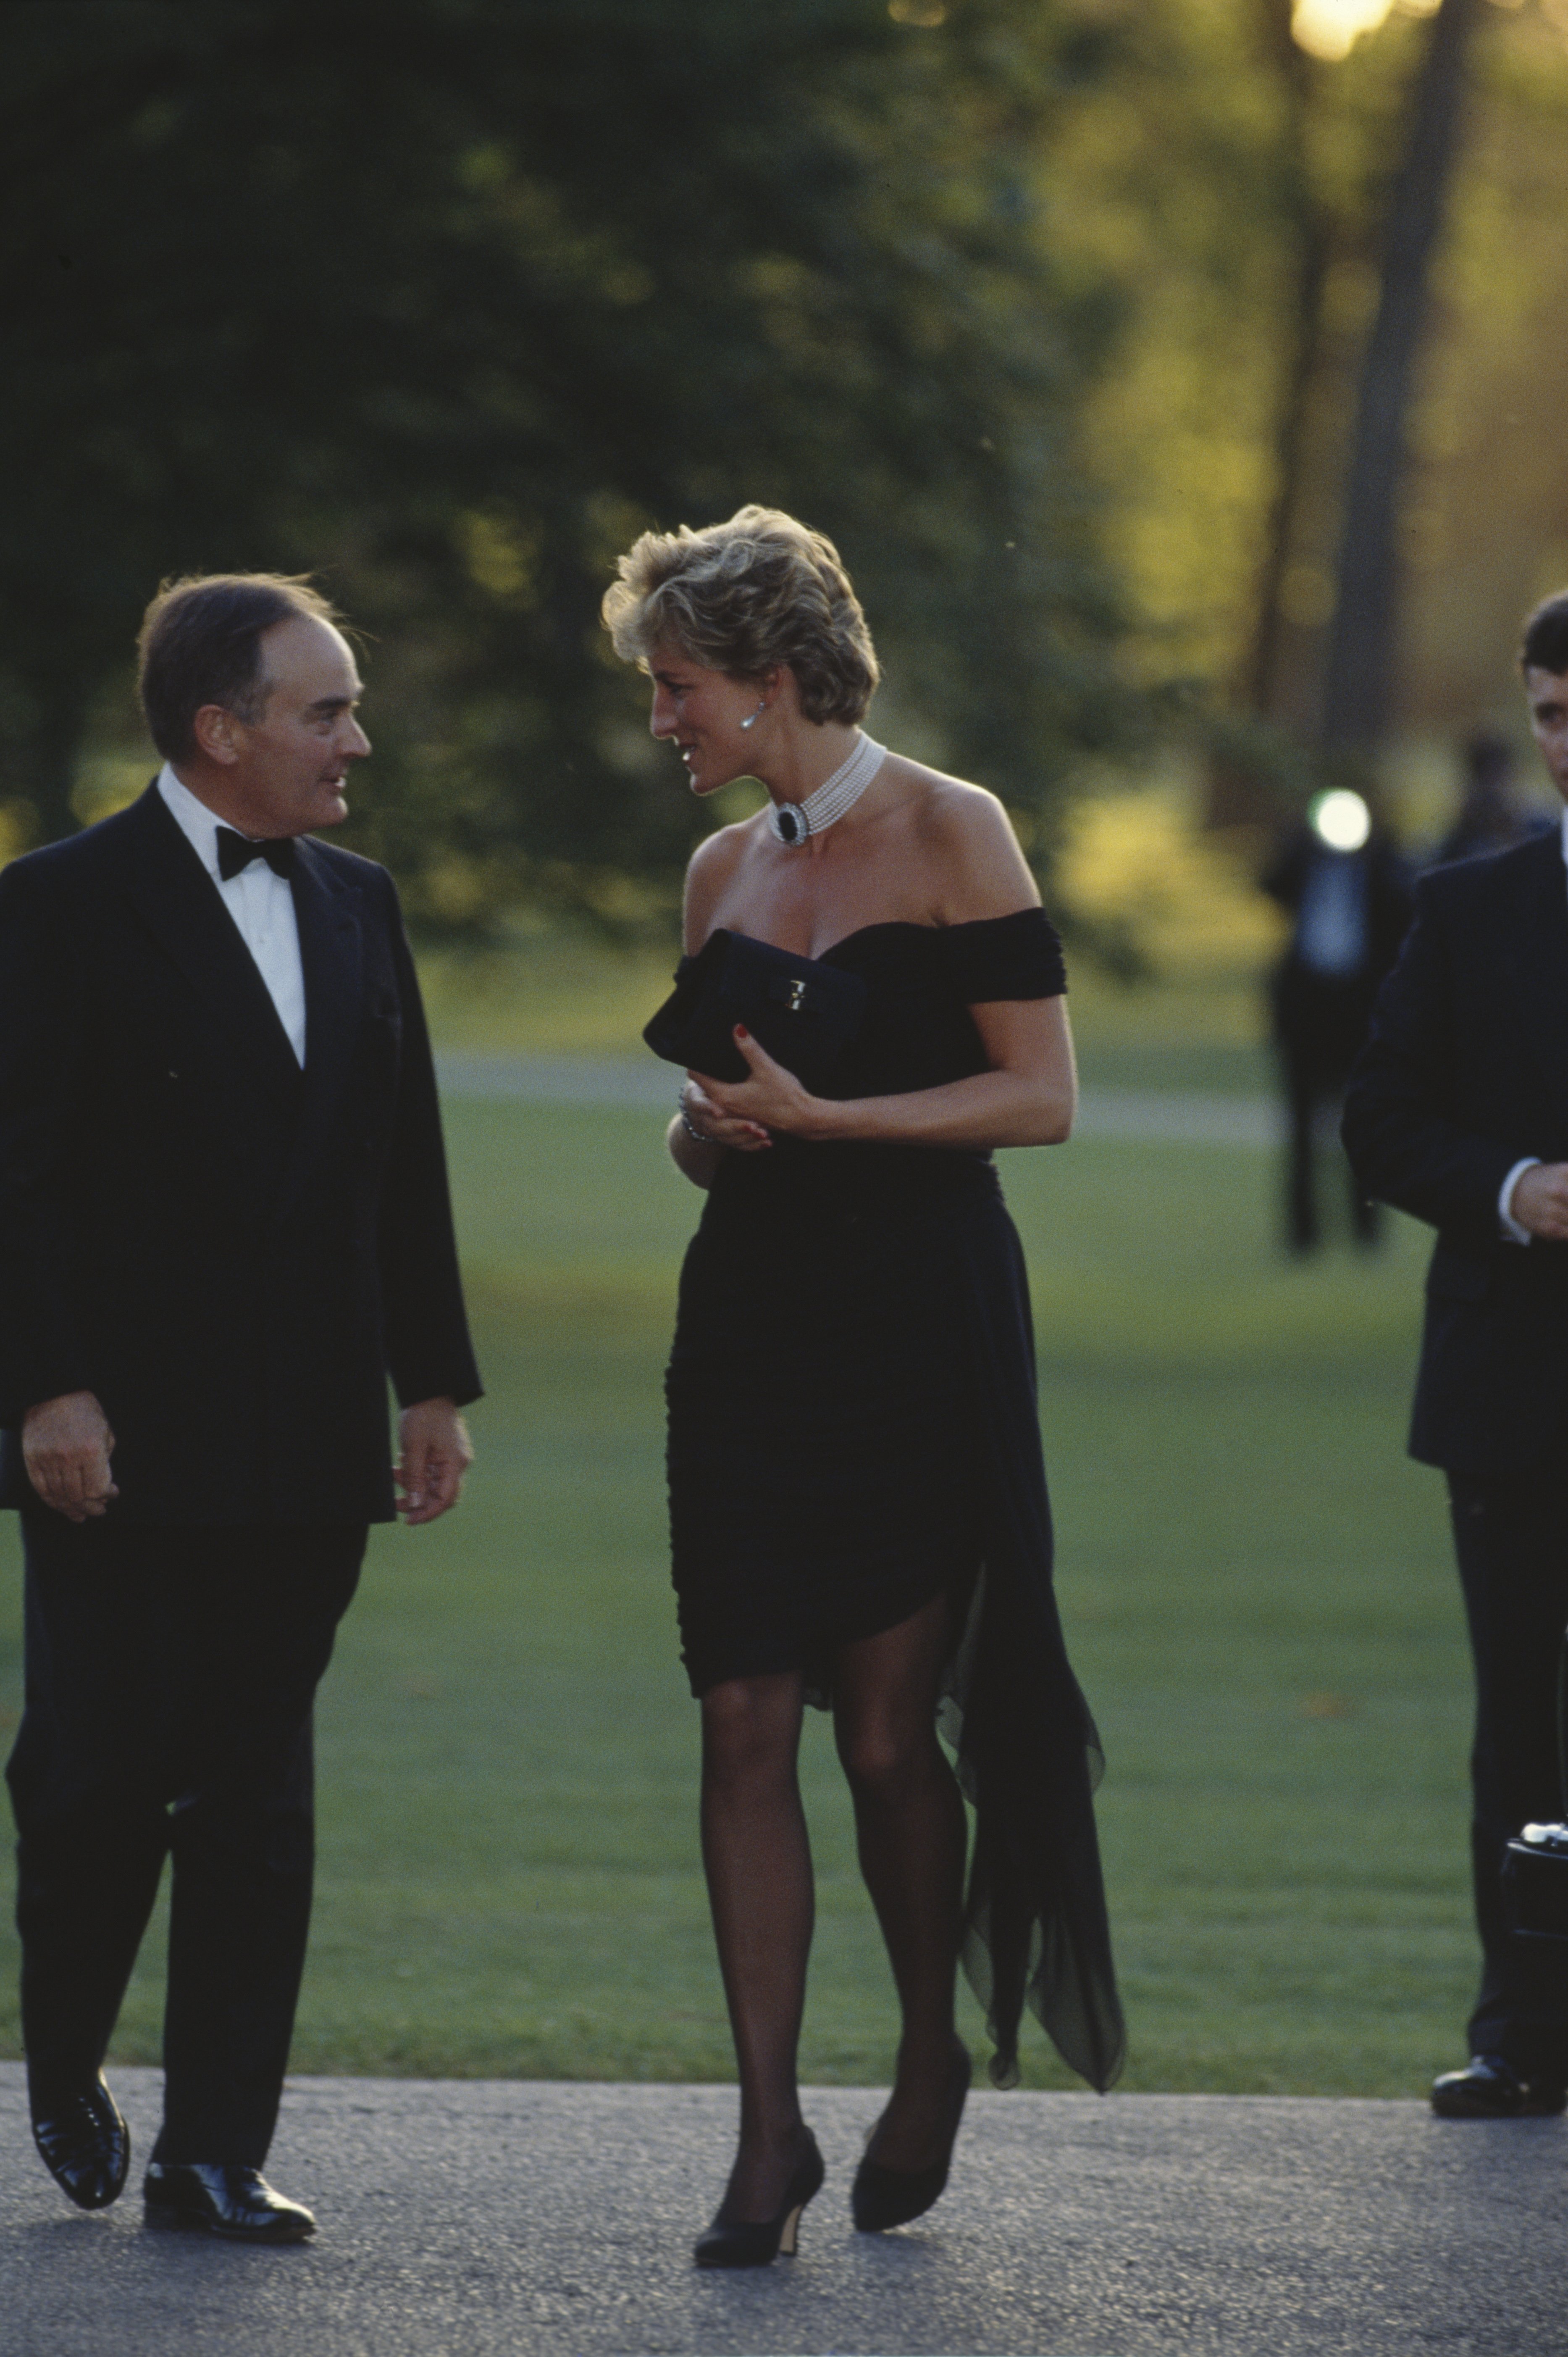 Prince Diana wearing the "revenge dress" at Vanity Fair's annual fundraiser in 1994. | Photo:: Getty Images